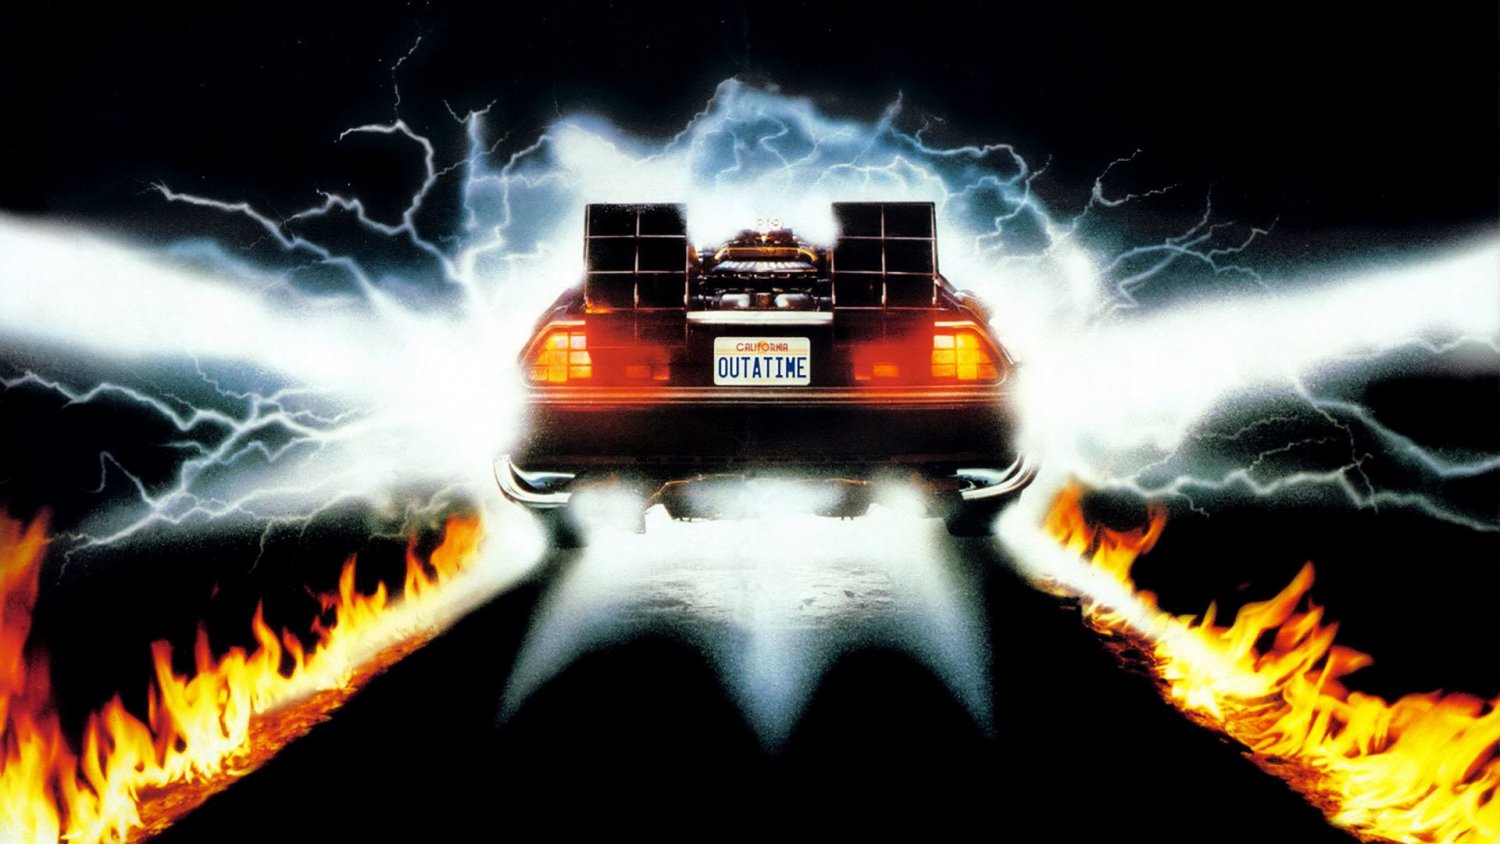 Get Back to the Future with Secret Cinema